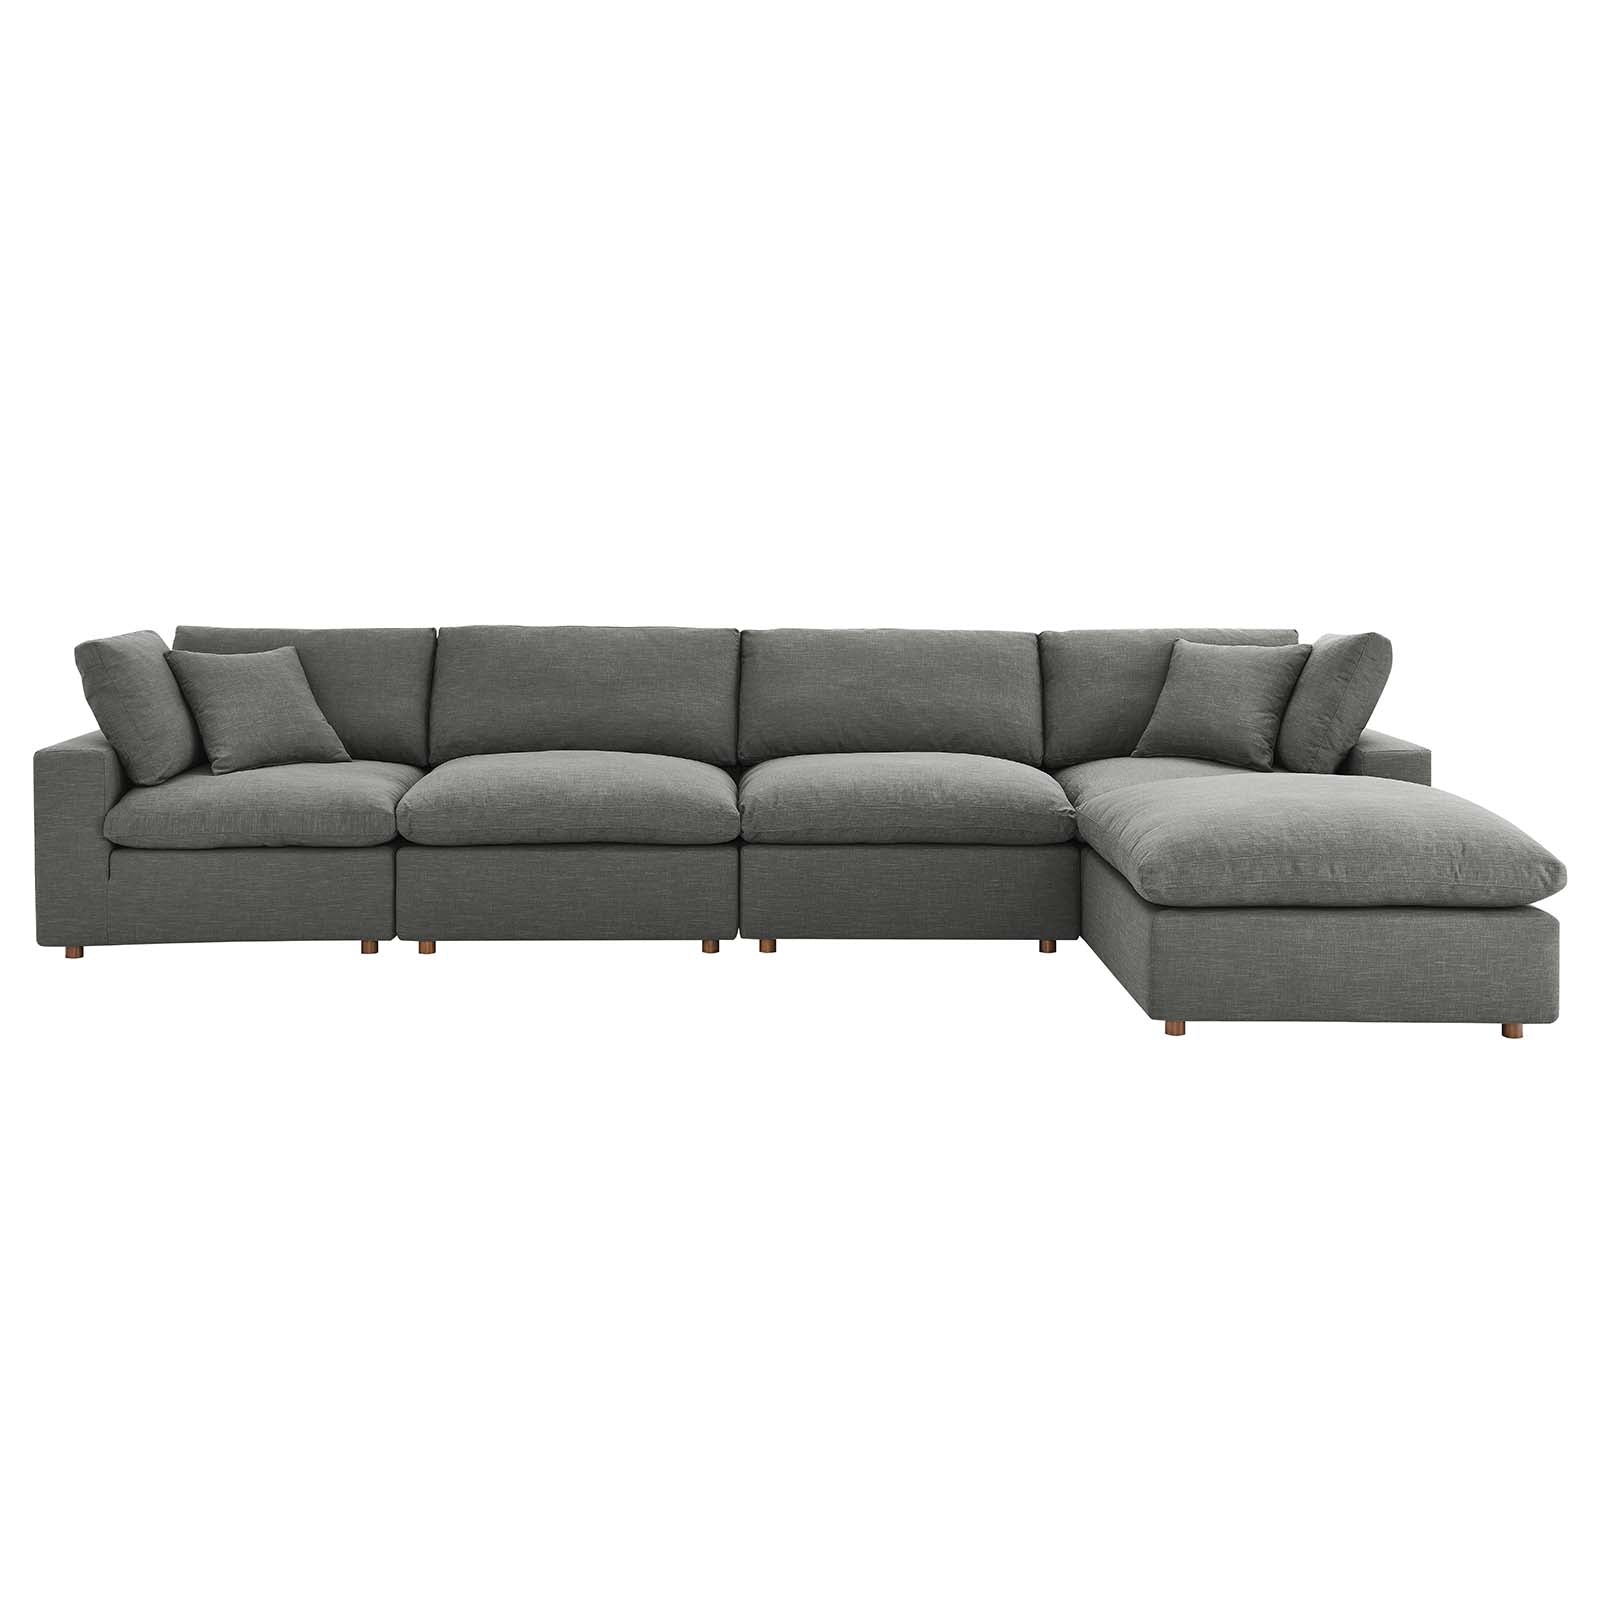 Commix Down Filled Overstuffed 5 Piece Sectional Sofa Set-Sofa Set-Modway-Wall2Wall Furnishings